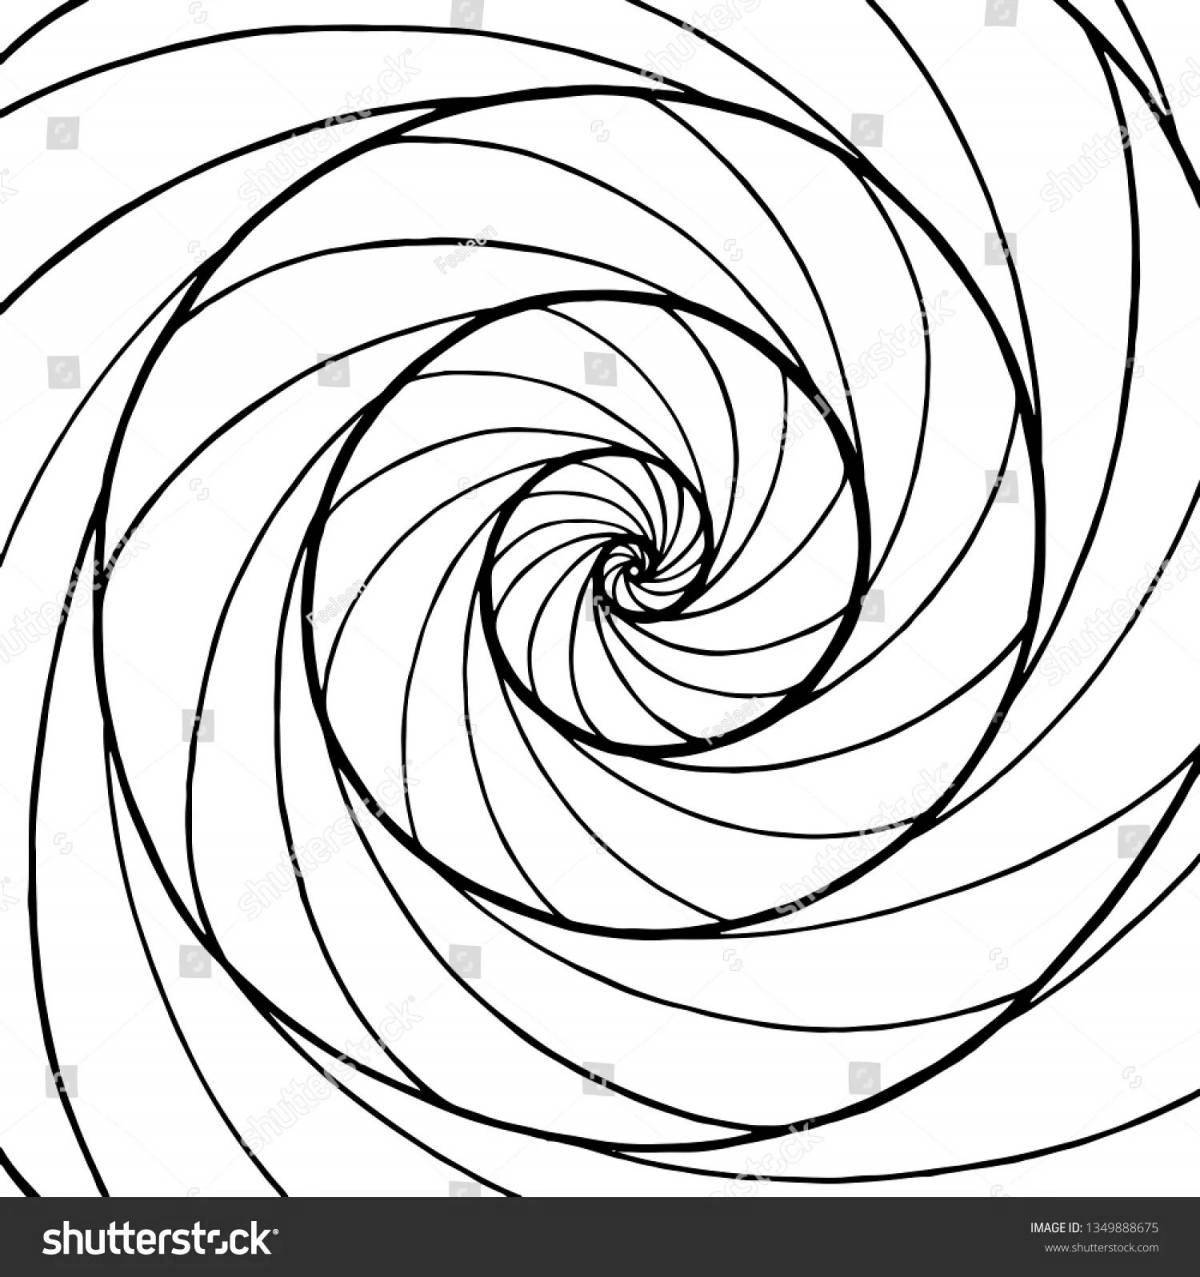 Calm spiral coloring page